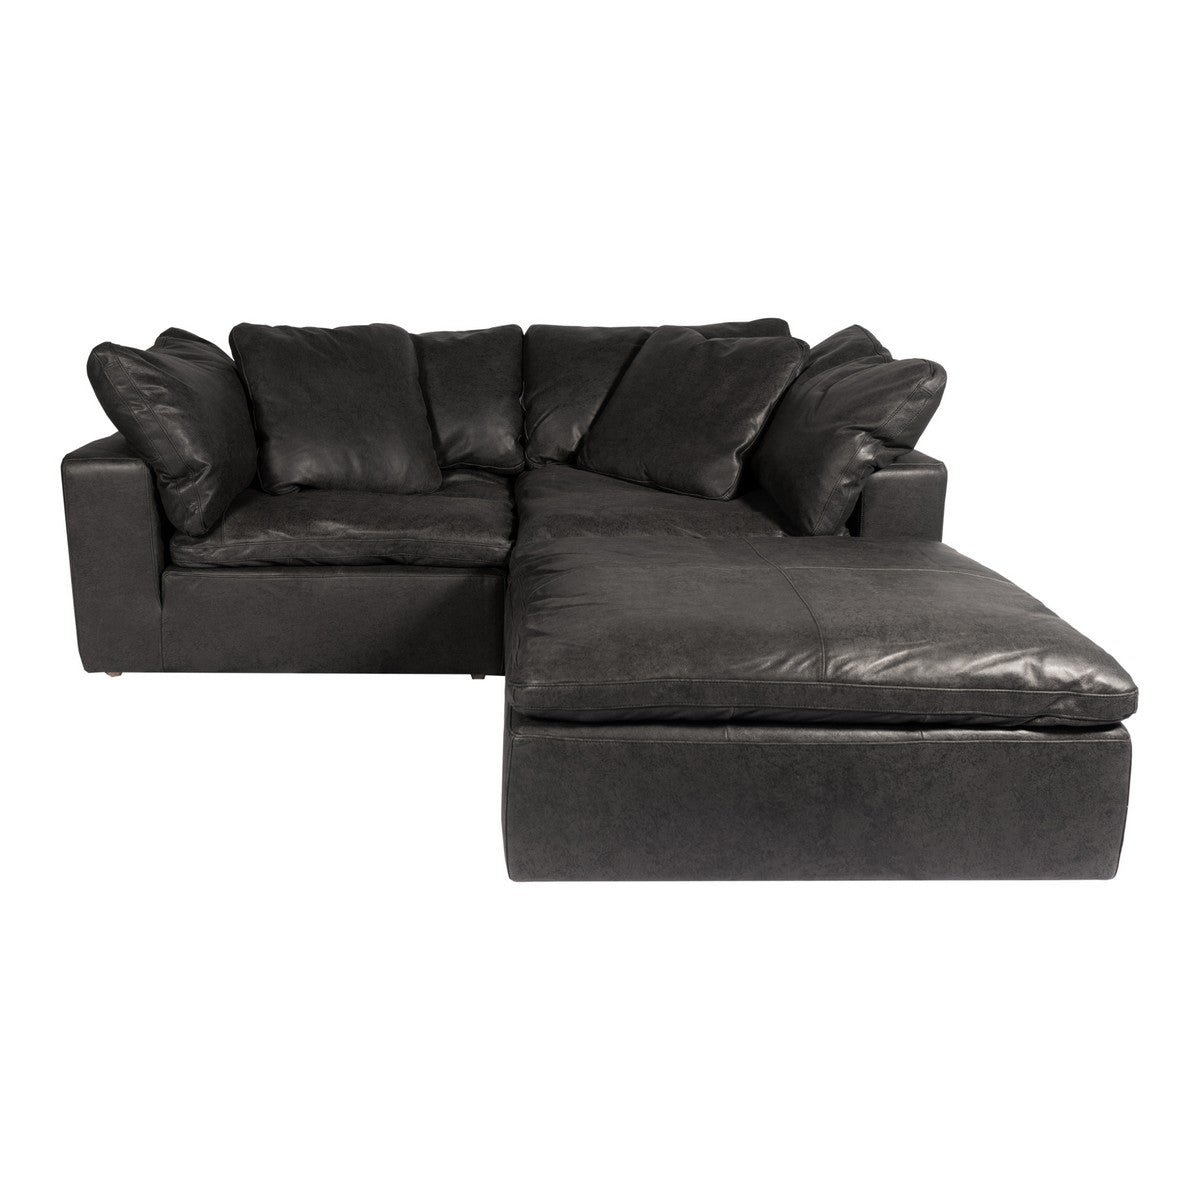 Moe's Home Collection Clay Nook Modular Sectional Nubuck Leather Black - YJ-1009-02 - Moe's Home Collection - Extras - Minimal And Modern - 1